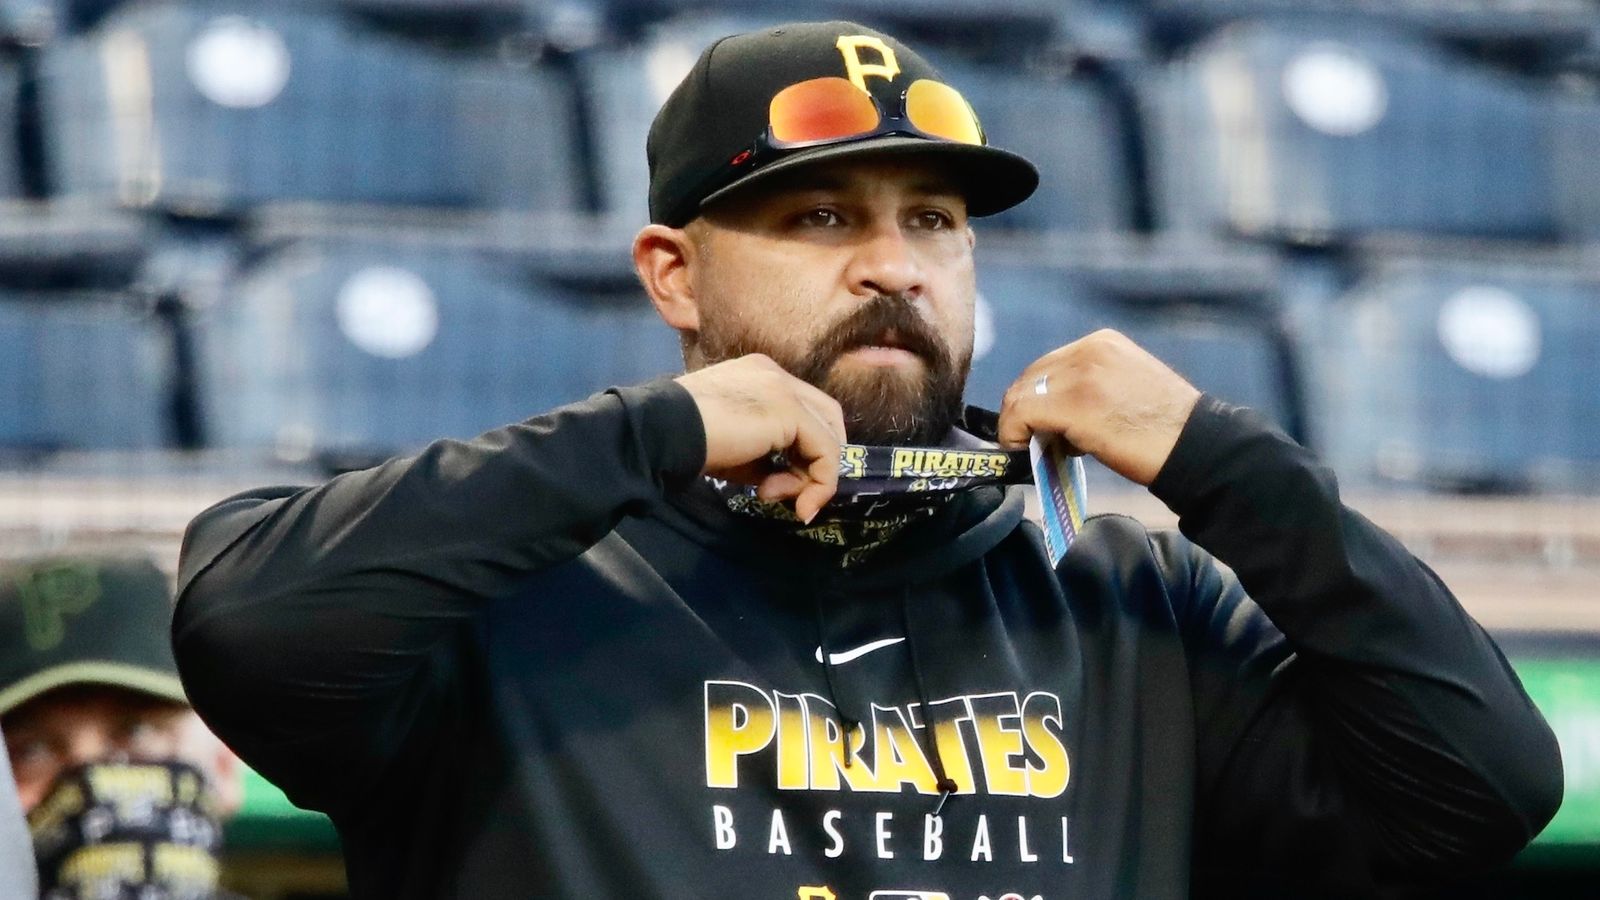 Covid-19 shutdown gave Pirates pitcher Clay Holmes time to